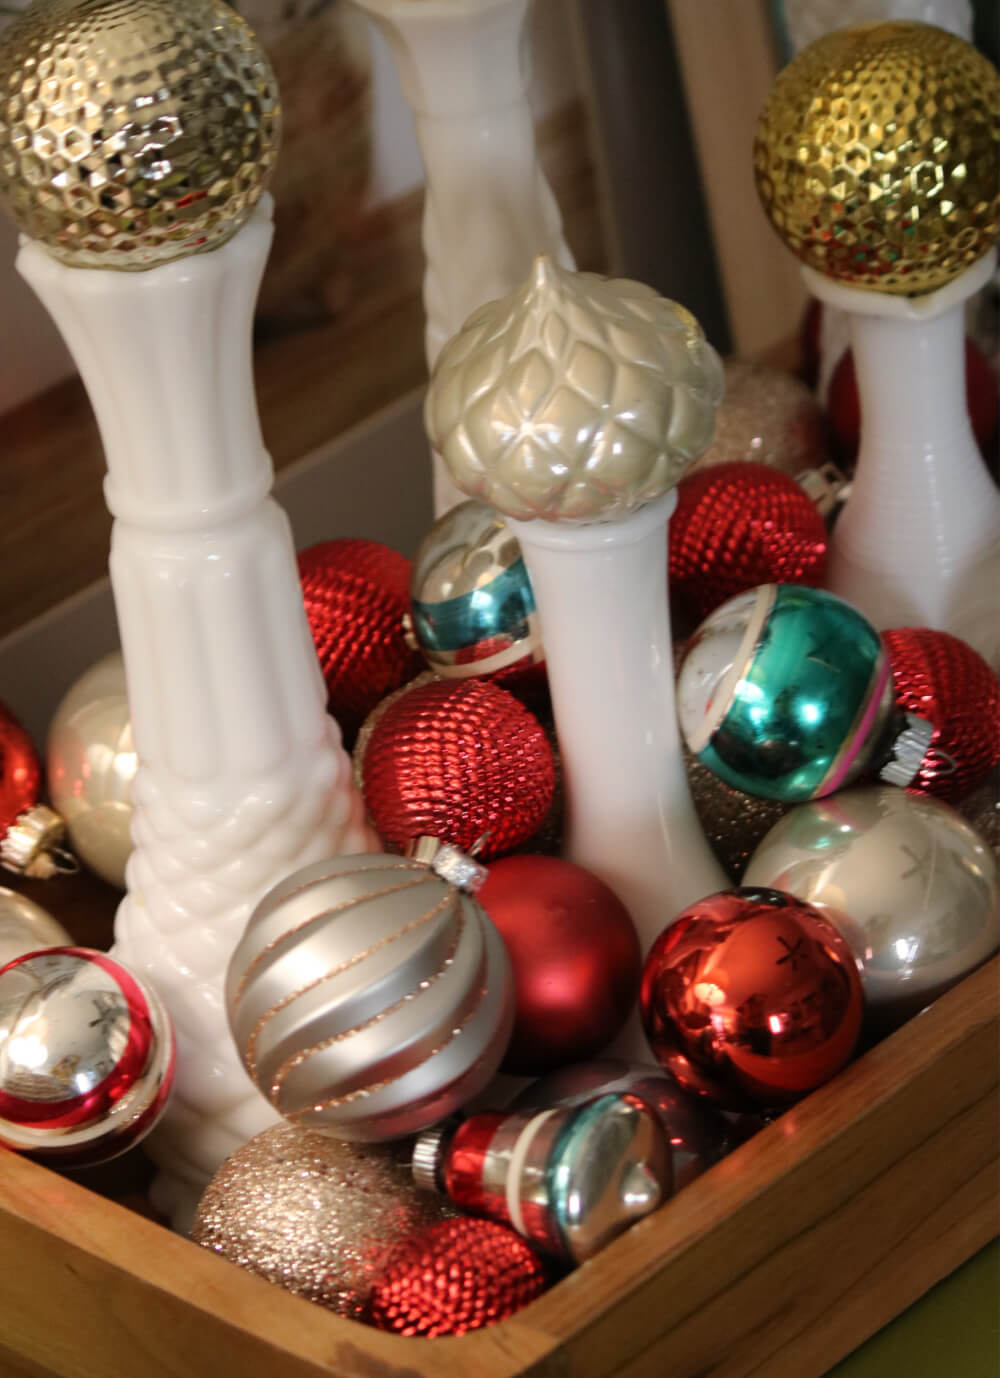 In Milk Glass & Ornament Christmas Display, this is a close up of one side of my dining room